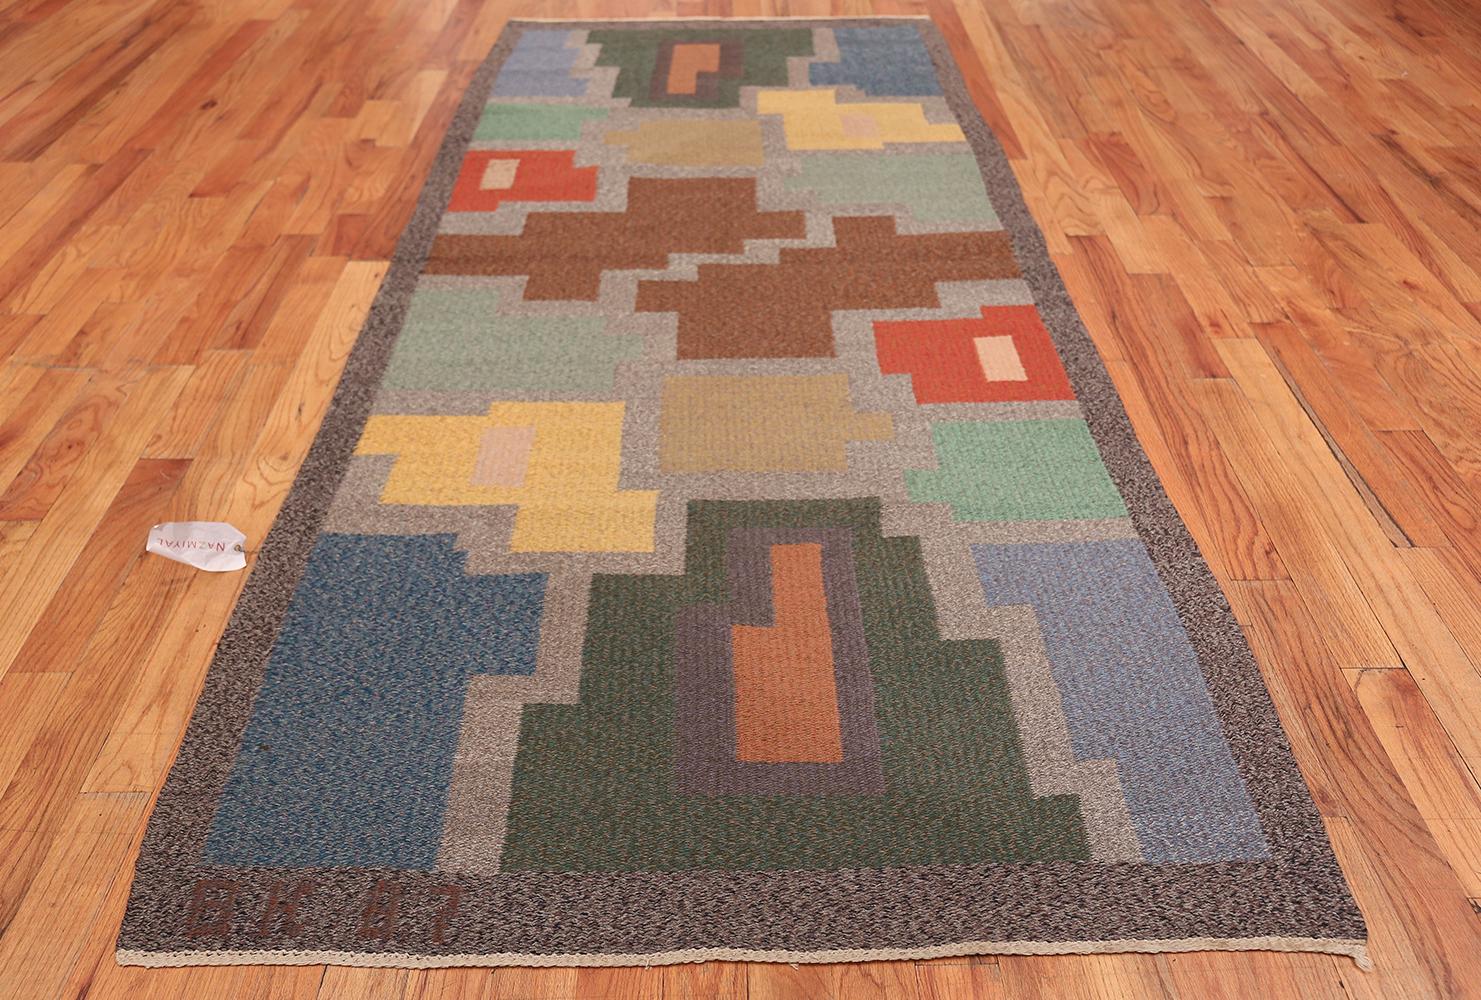 Woven in a bold right-angle style, this striking Swedish area rug is like a visual etude that explores the effects of color and form and investigates the magnetic relationship between negative and positive space. The elongated rectangular